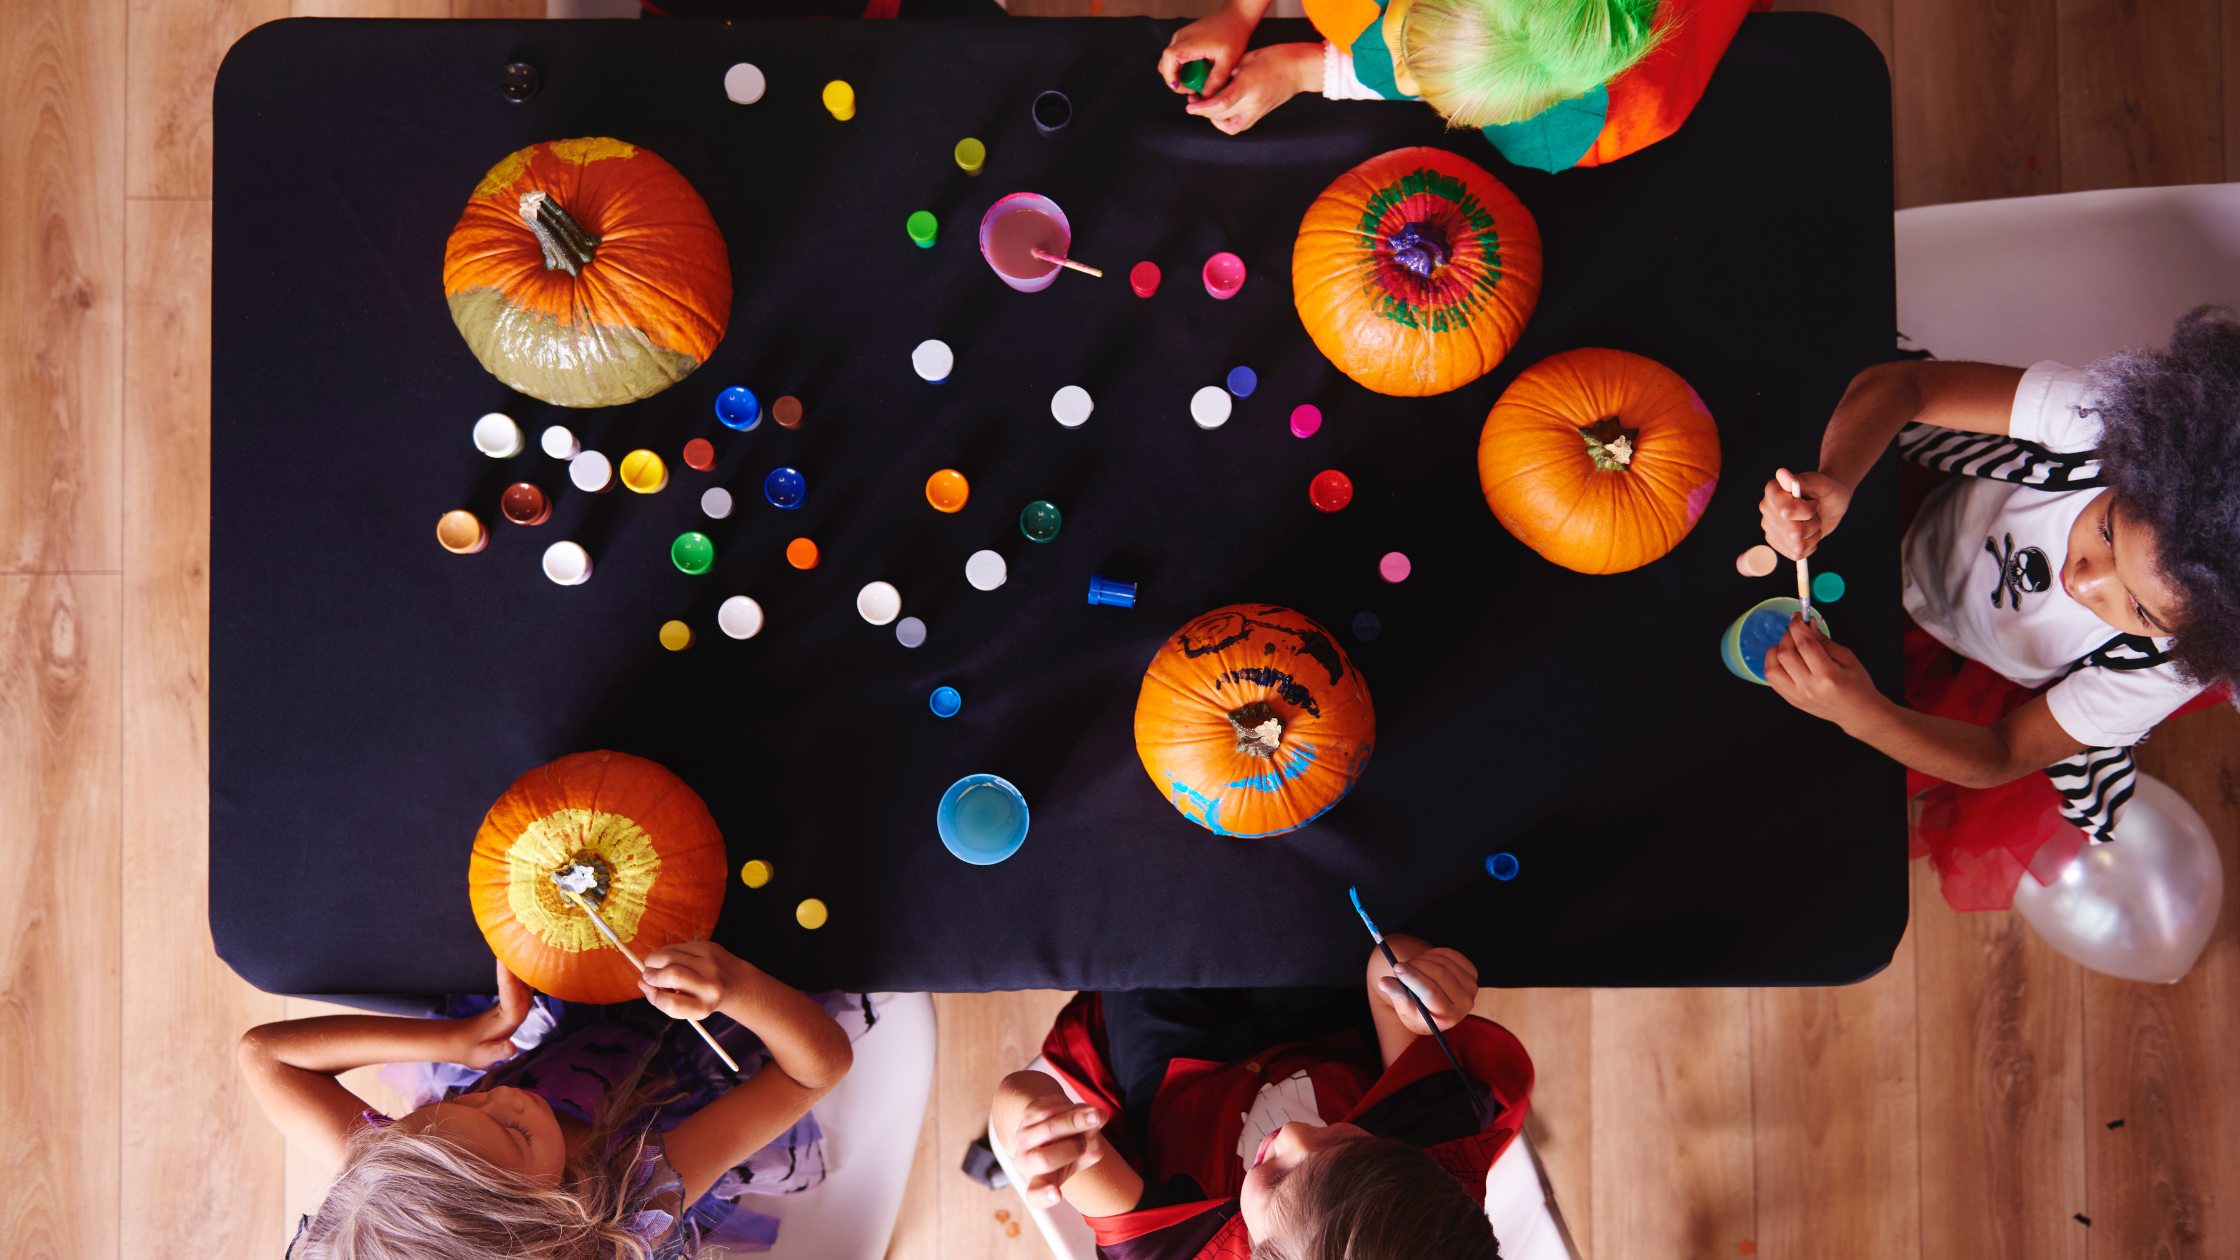 you don't need a knife to decorate pumpkins